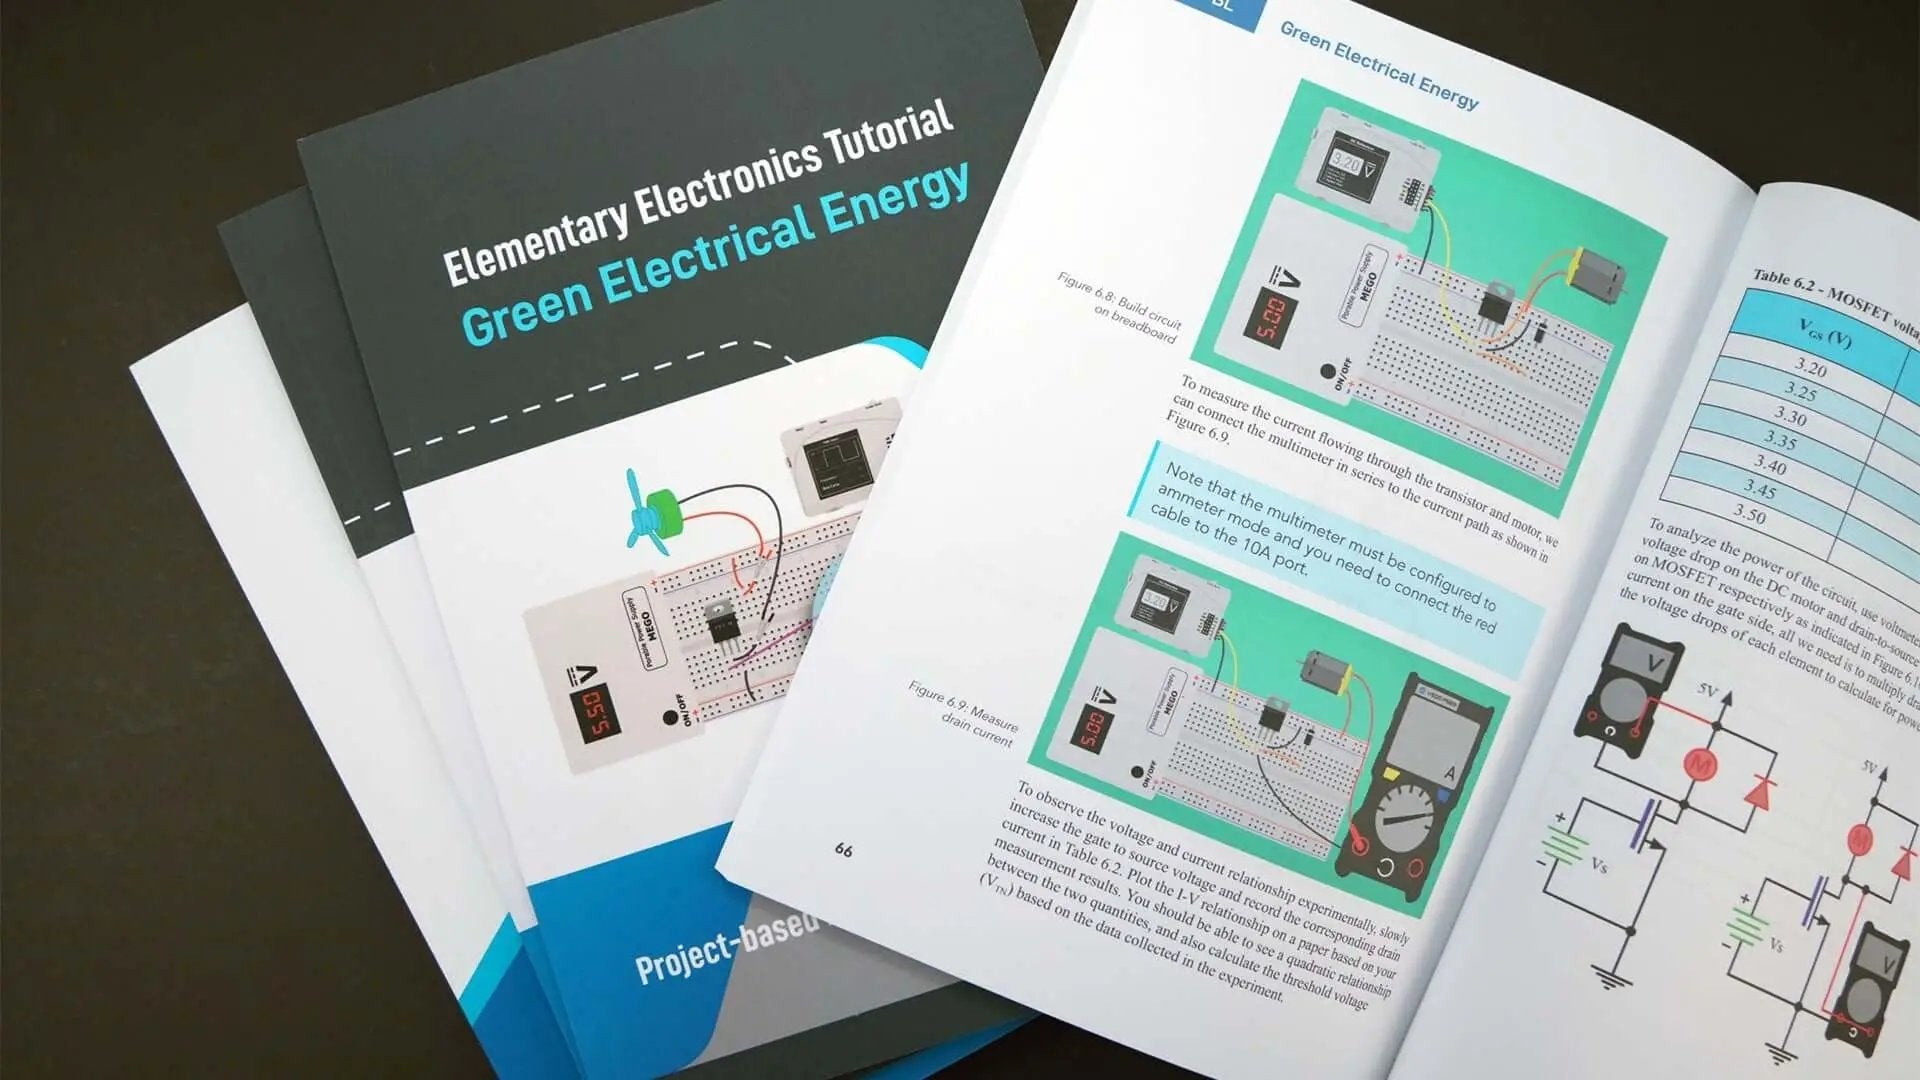 Green Electrical Energy - Electronics Fundamentals Learning Kit - EIM Technology SHOP